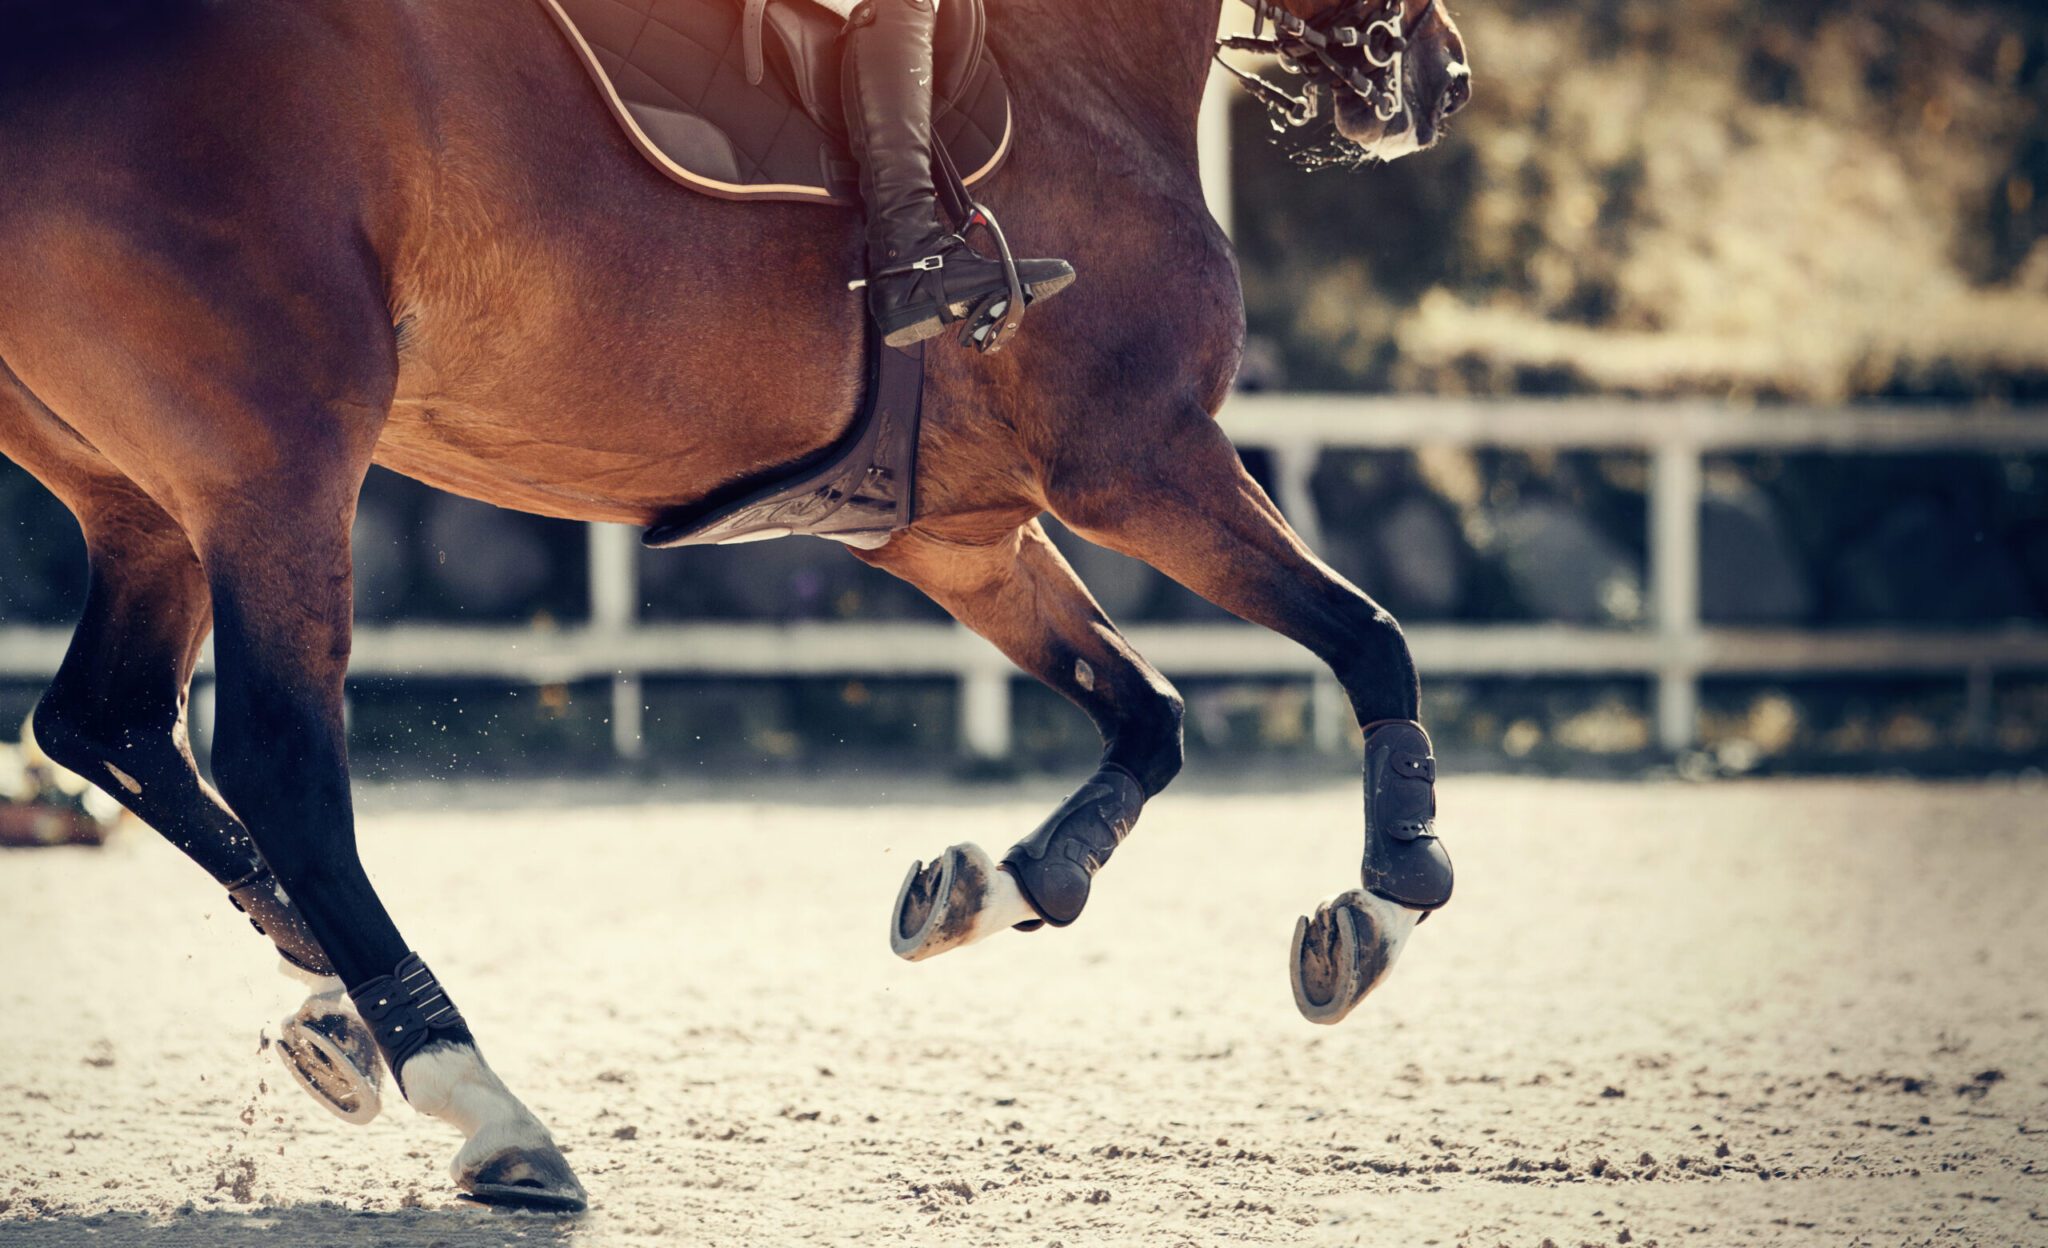 Equestrian sport. Galloping horse. Legs of a galloping horse close-up. Dressage of horses in the arena. The leg of the rider in the stirrup, riding on a horse. Overcome obstacles. Jumping competition.